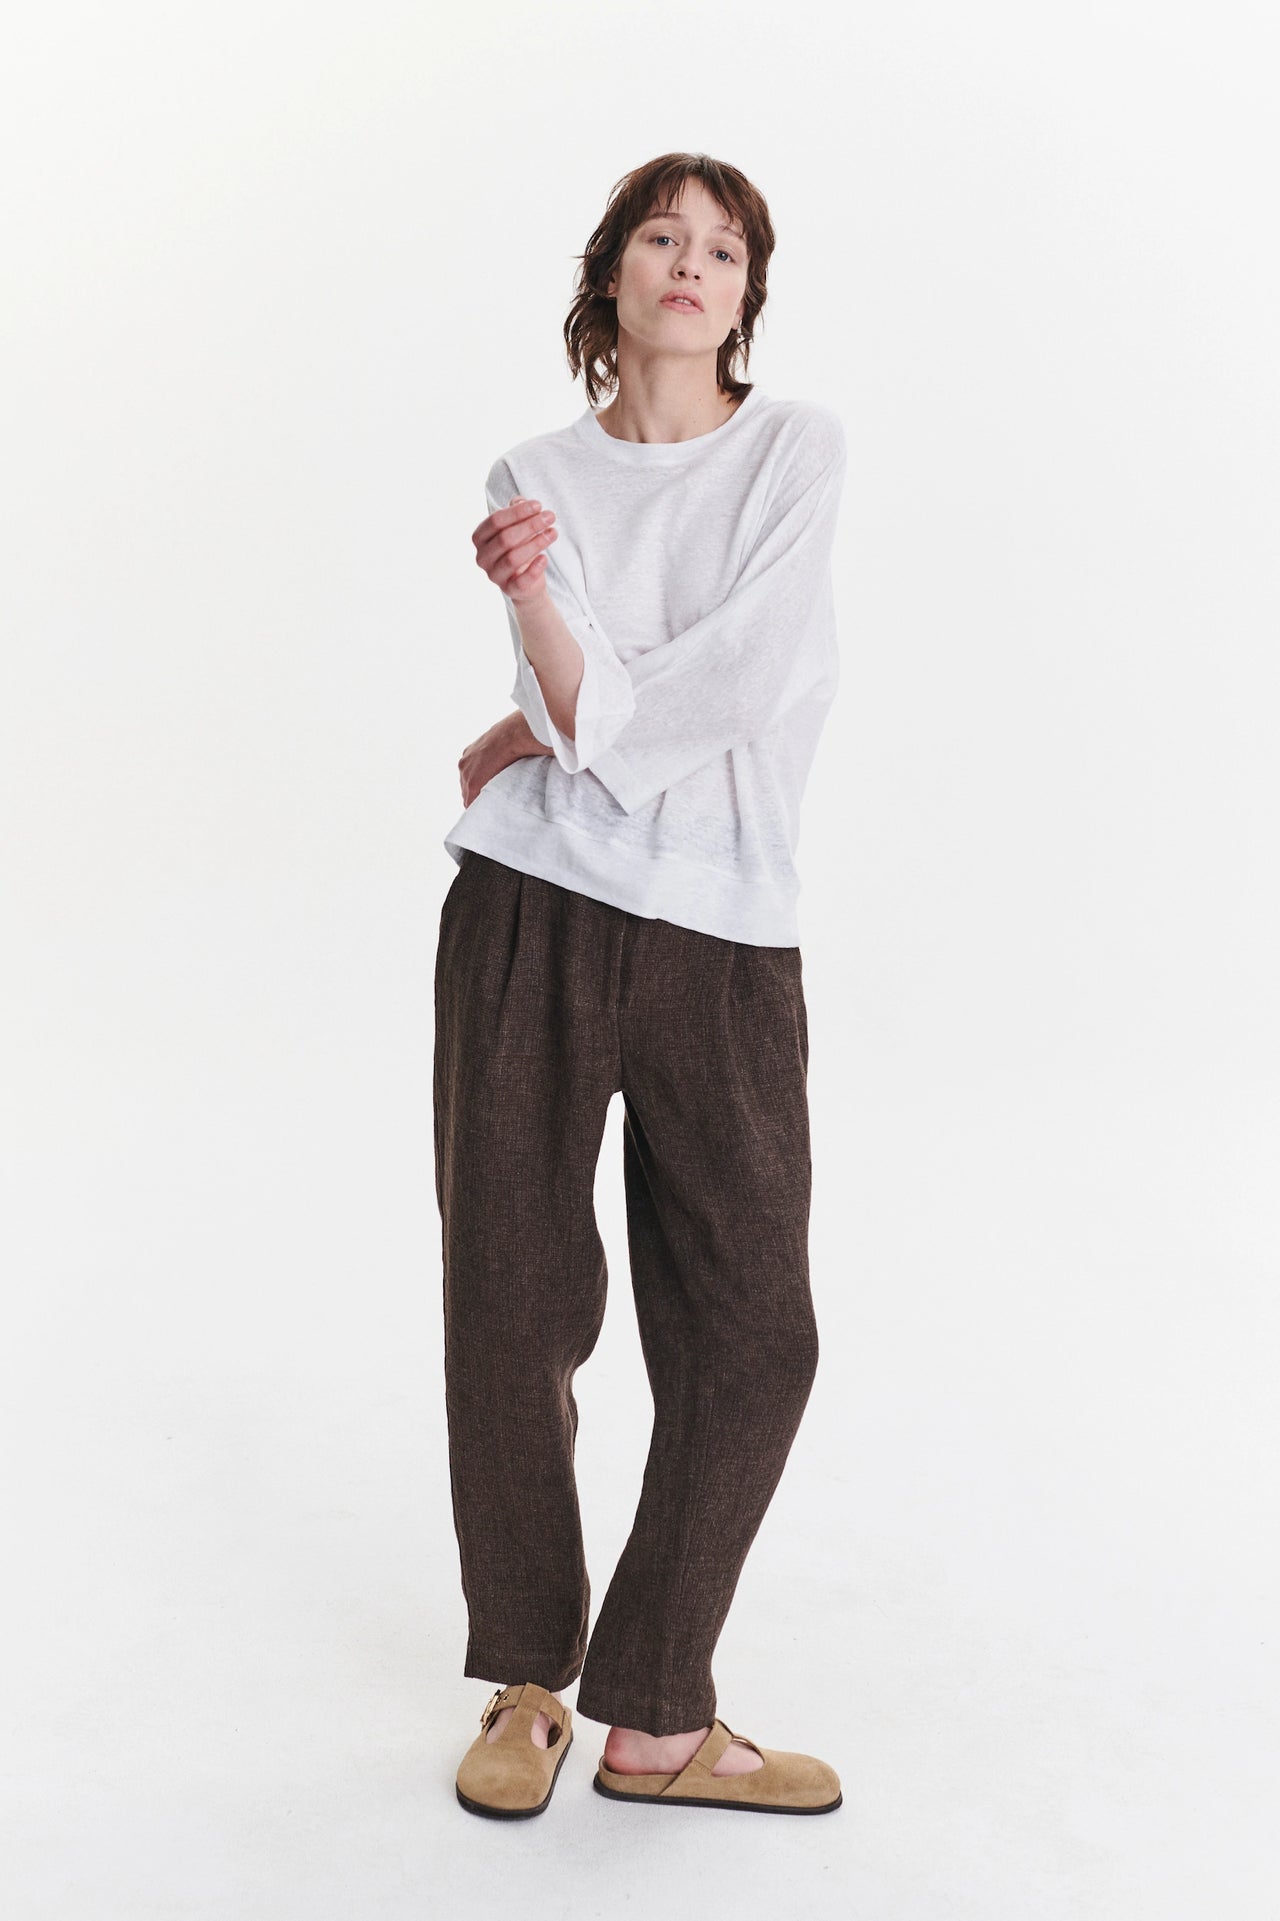 Threequarter Sleeve Top in the Finest White Lithuanian Linen Jersey